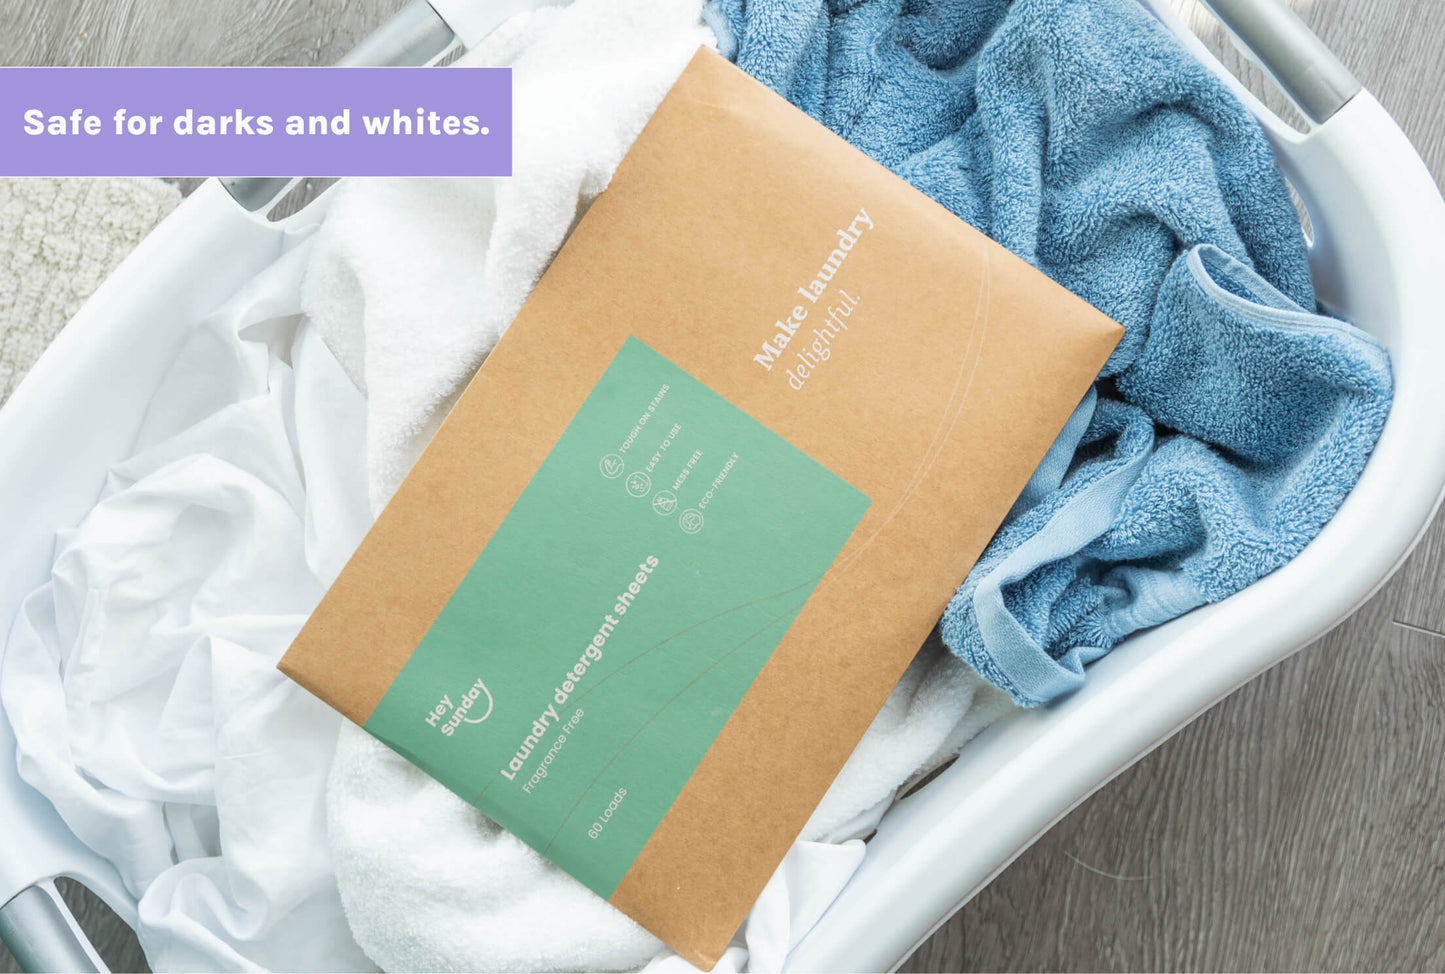 Tough on stains, gentle on skin laundry detergent sheets